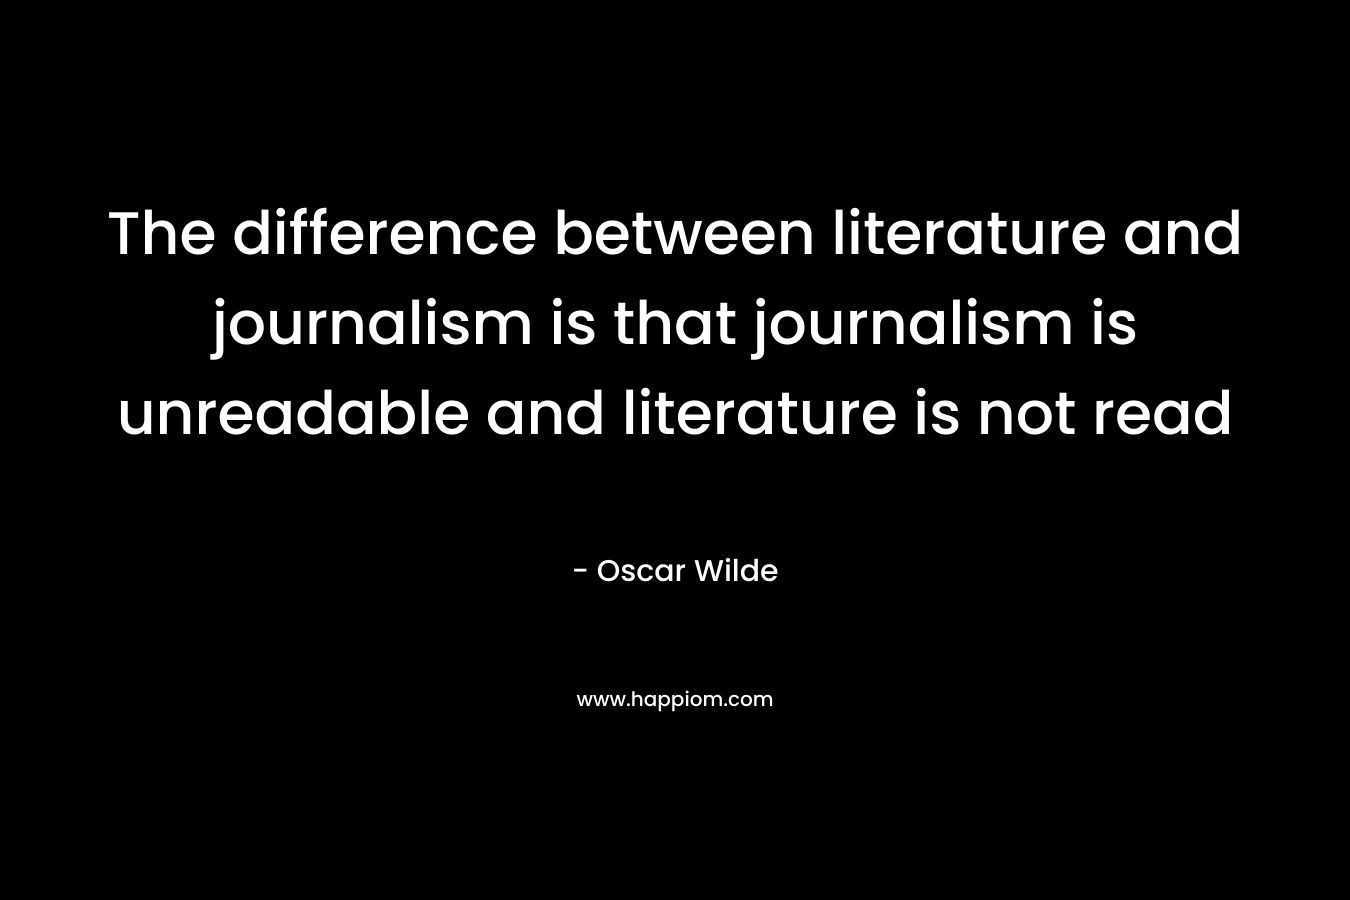 The difference between literature and journalism is that journalism is unreadable and literature is not read